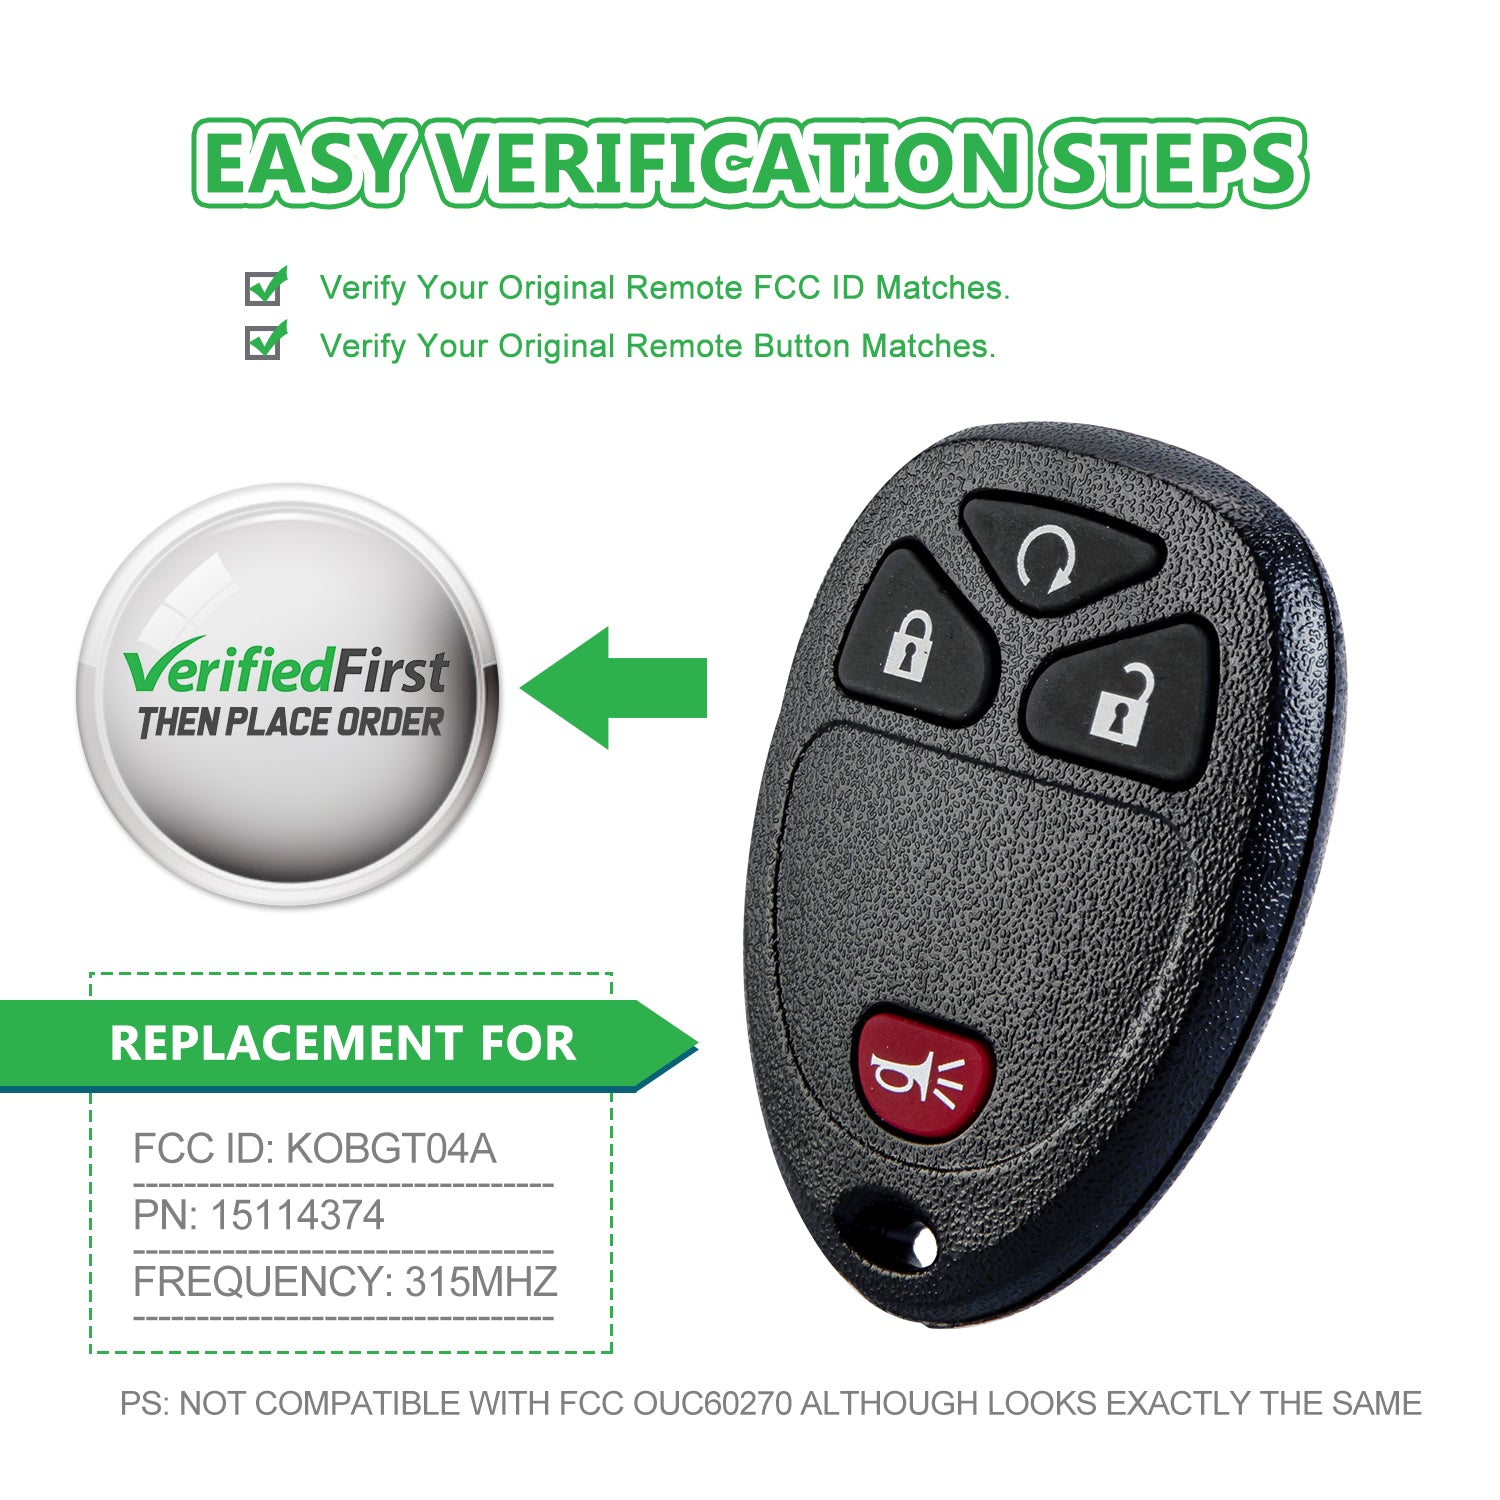 Lots of 5 Car Remote Fob Replacement for KOBGT04A 15114374 fits 2006 2007 2008 2009 Chevy HHR Uplander